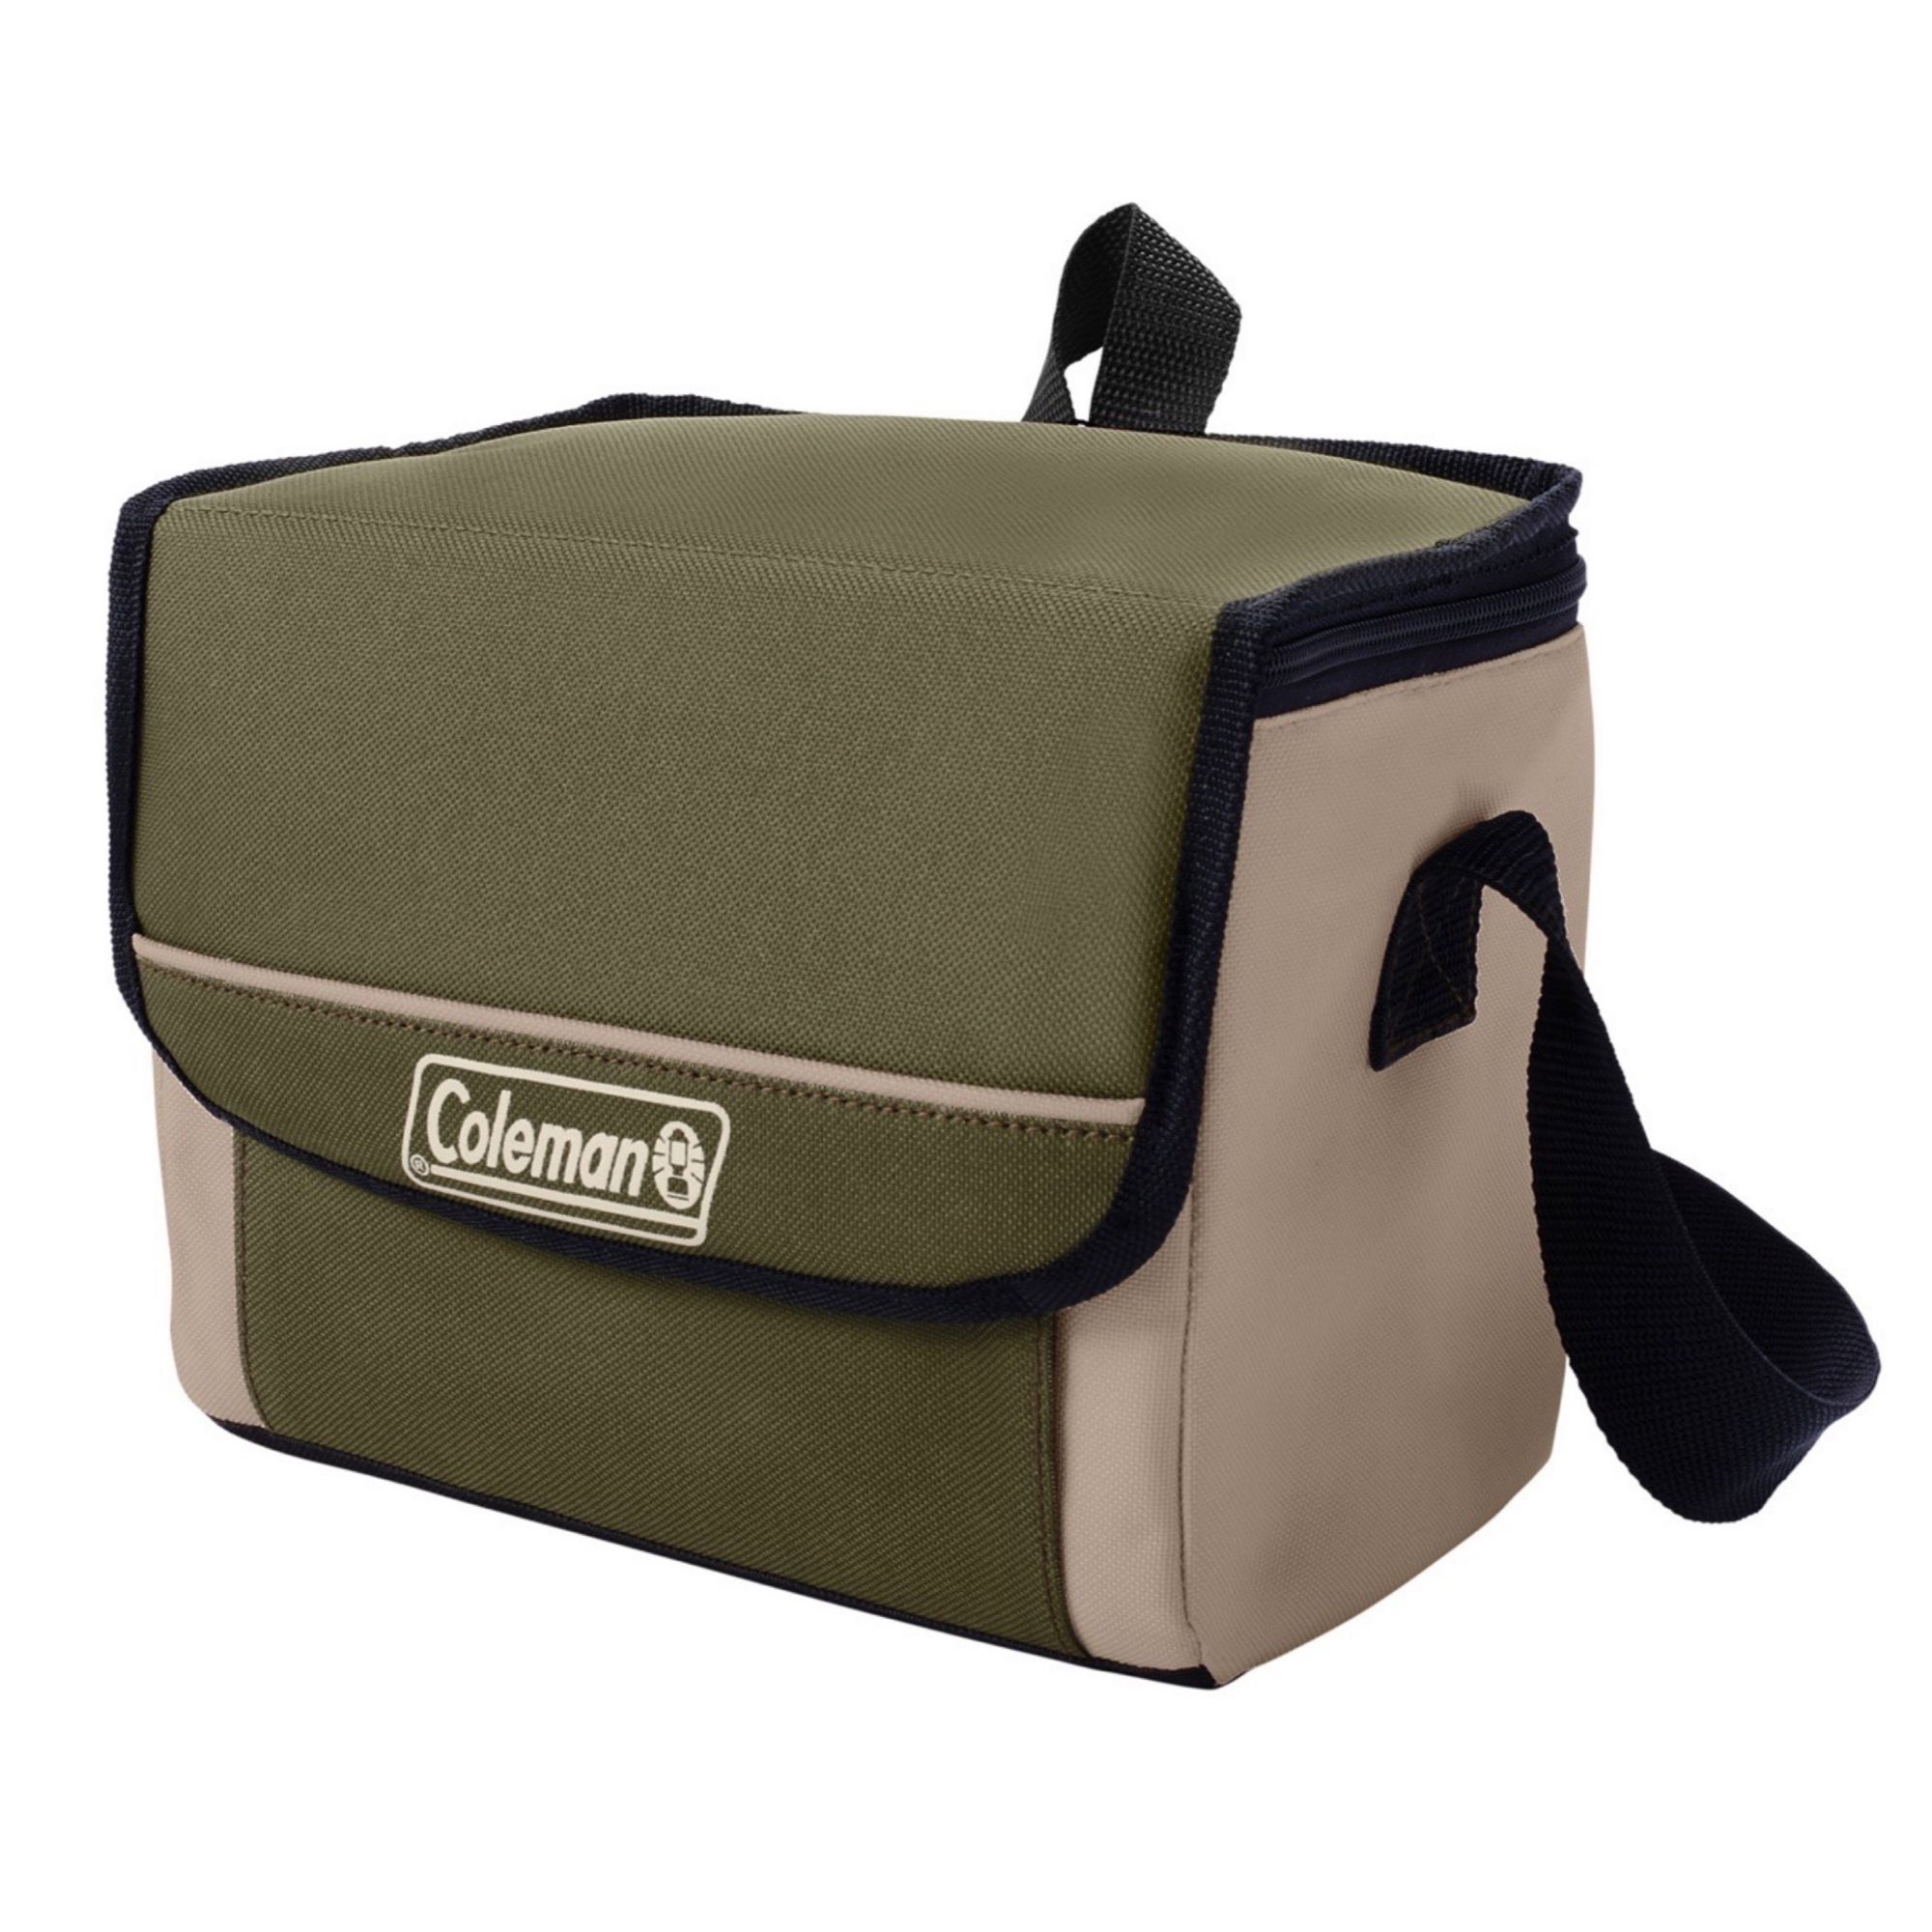 coleman soft cooler 9 can